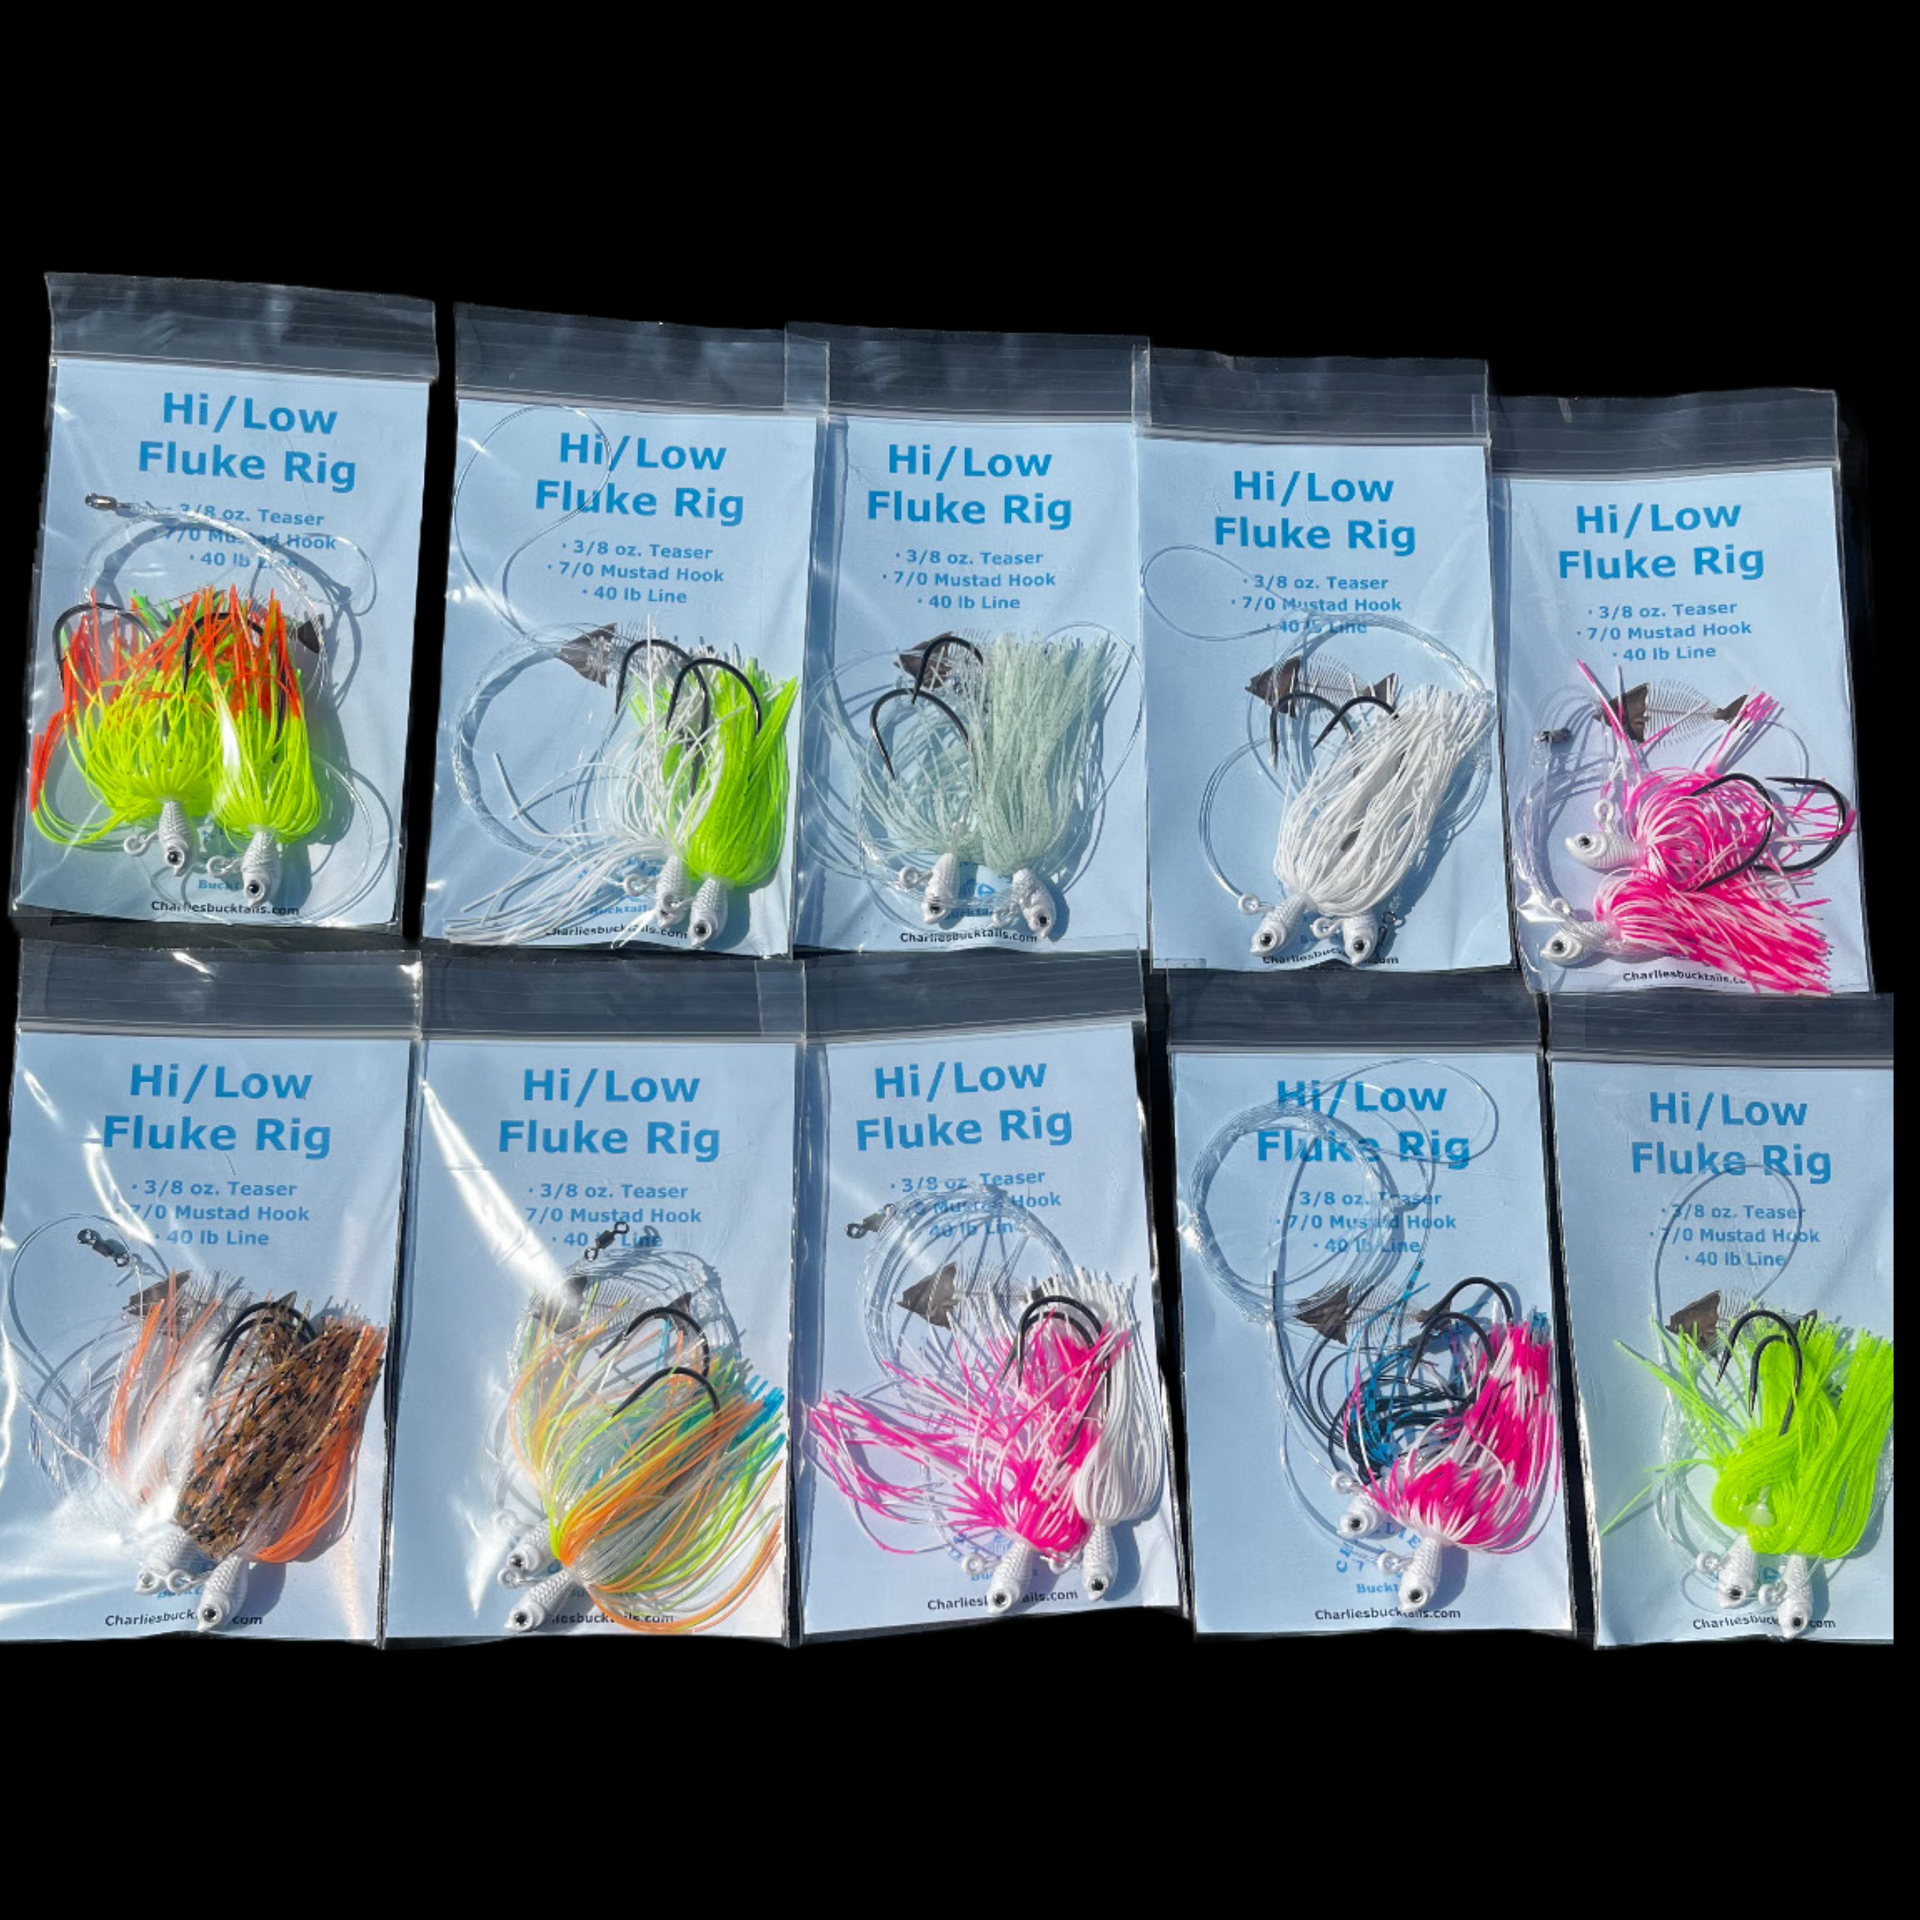 Wellsys Game Fishing CLEAR RIGGING BEADS Pkt/25